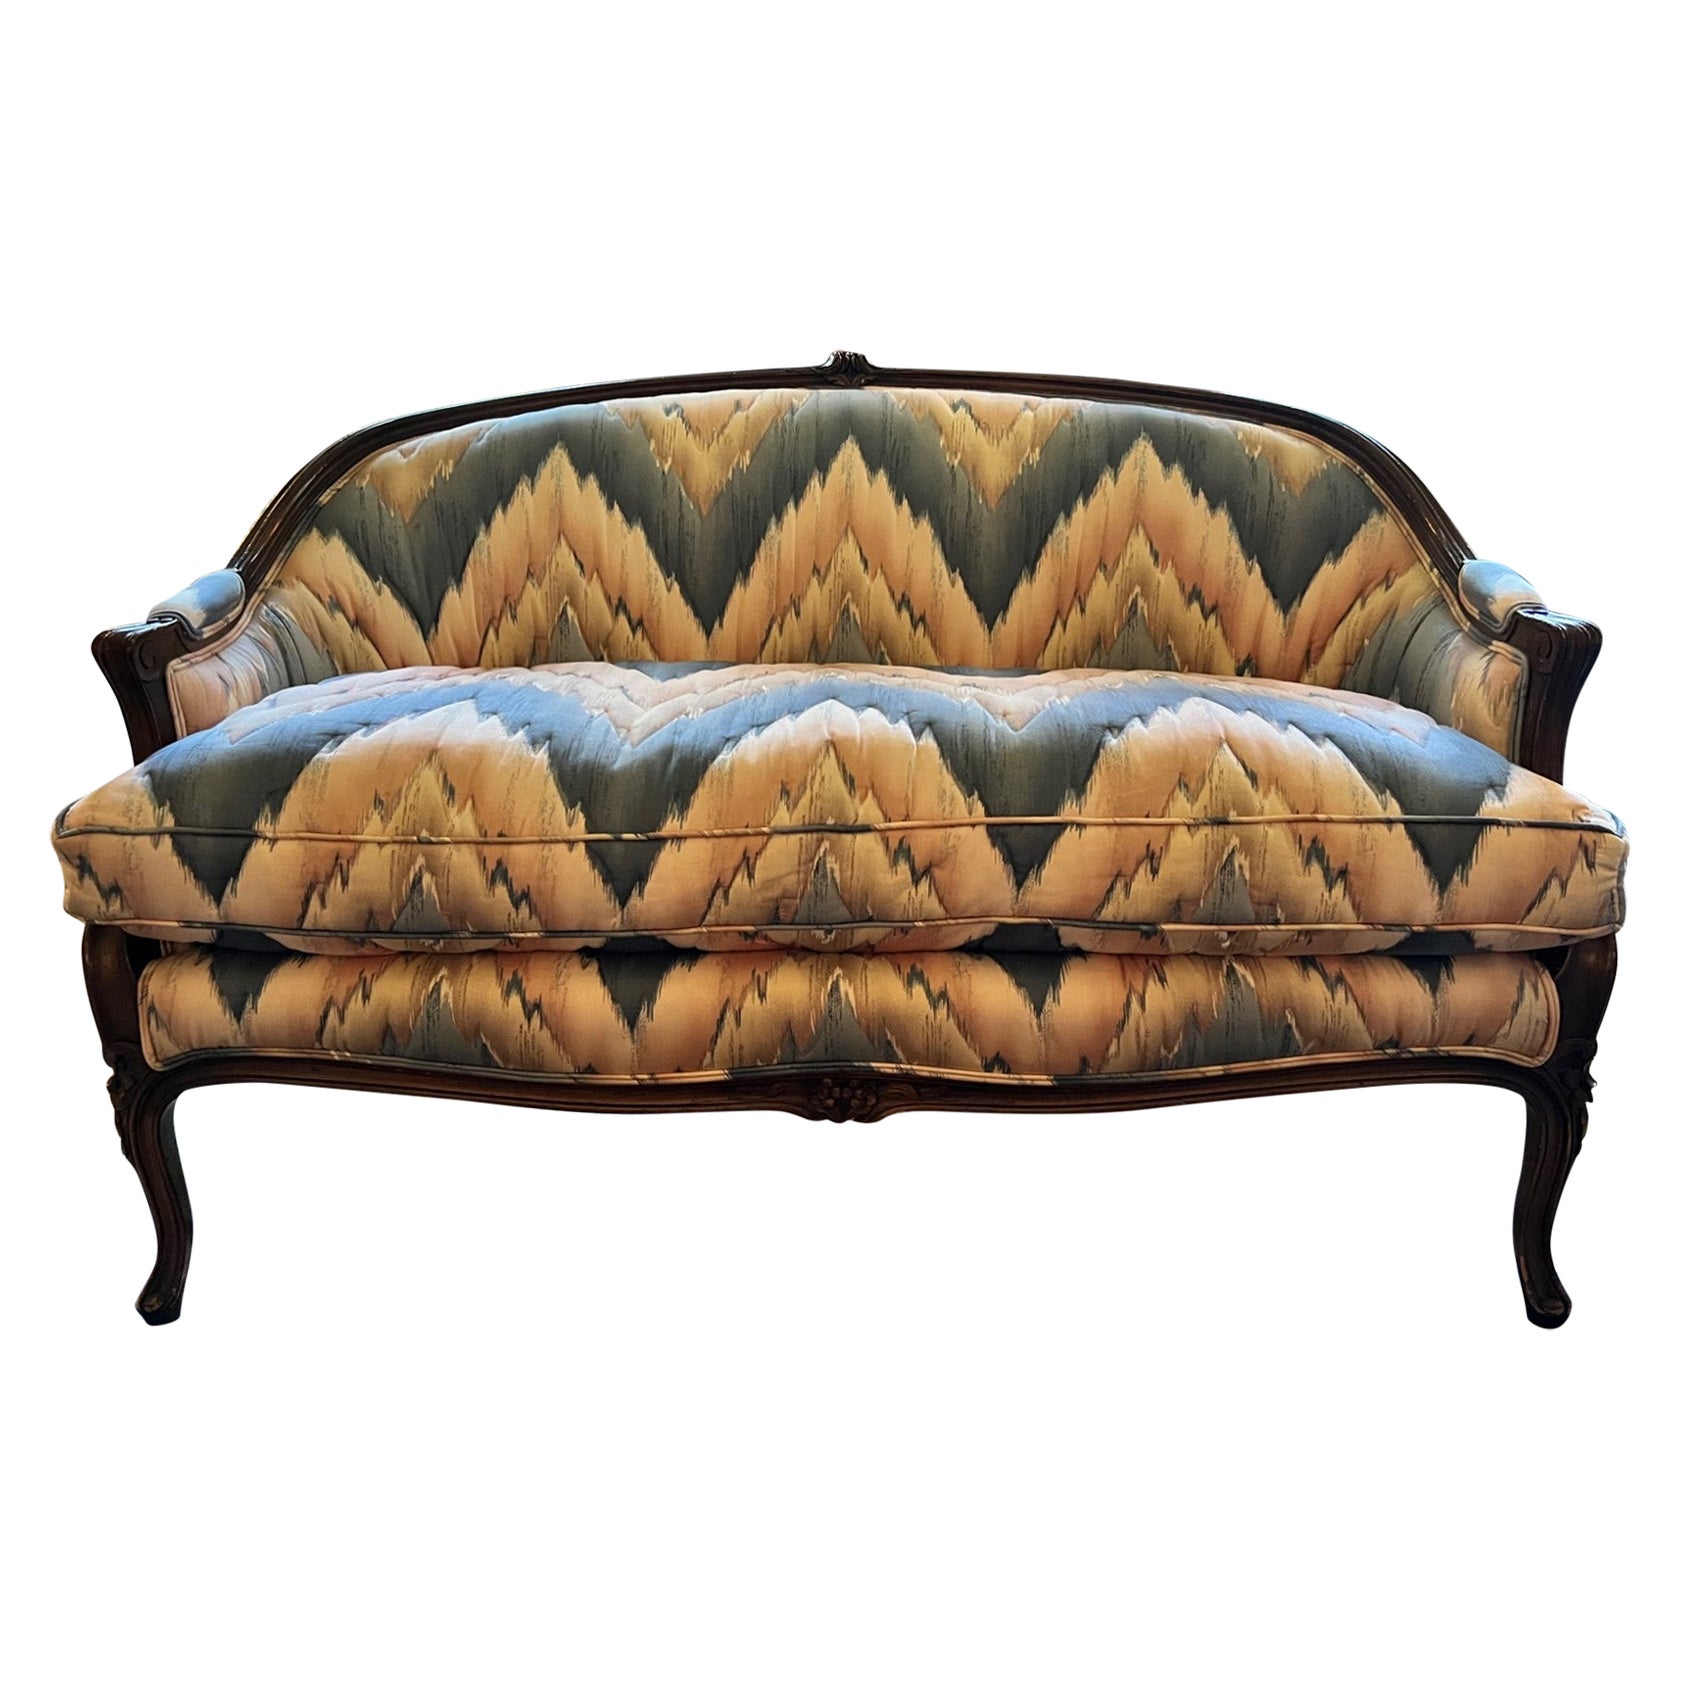 1970 Louis XV Style Curved Settee with Quilted Flamestitch Upholstery 